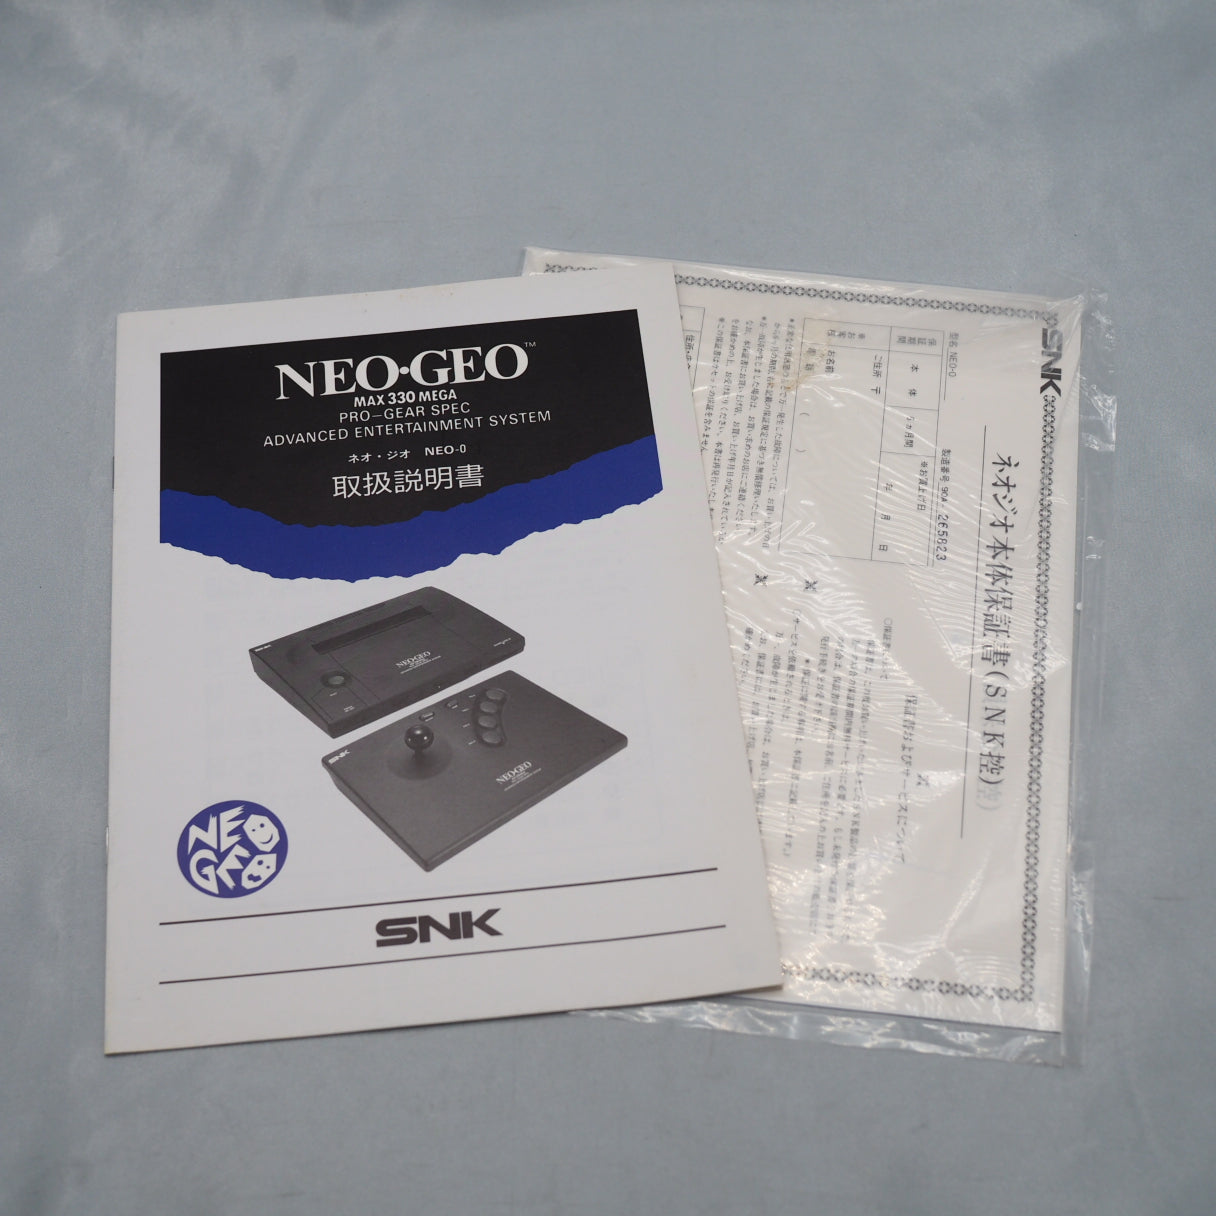 NEO GEO AES Console System Boxed [serial number match]